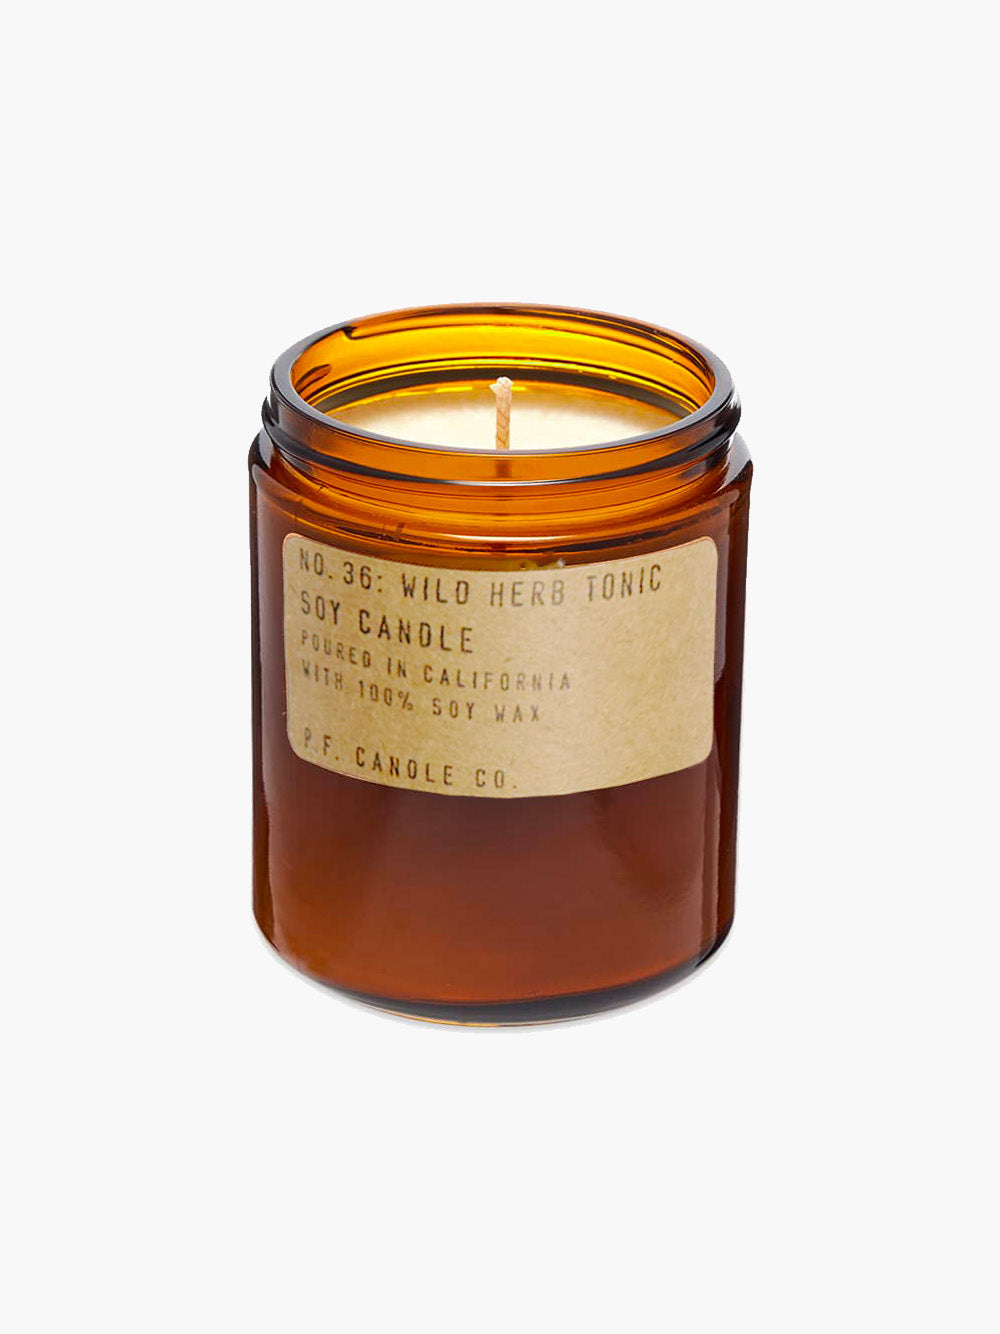 P.F. Candle Co. 204g Soy Candle - No.36 Wild Herb Tonic